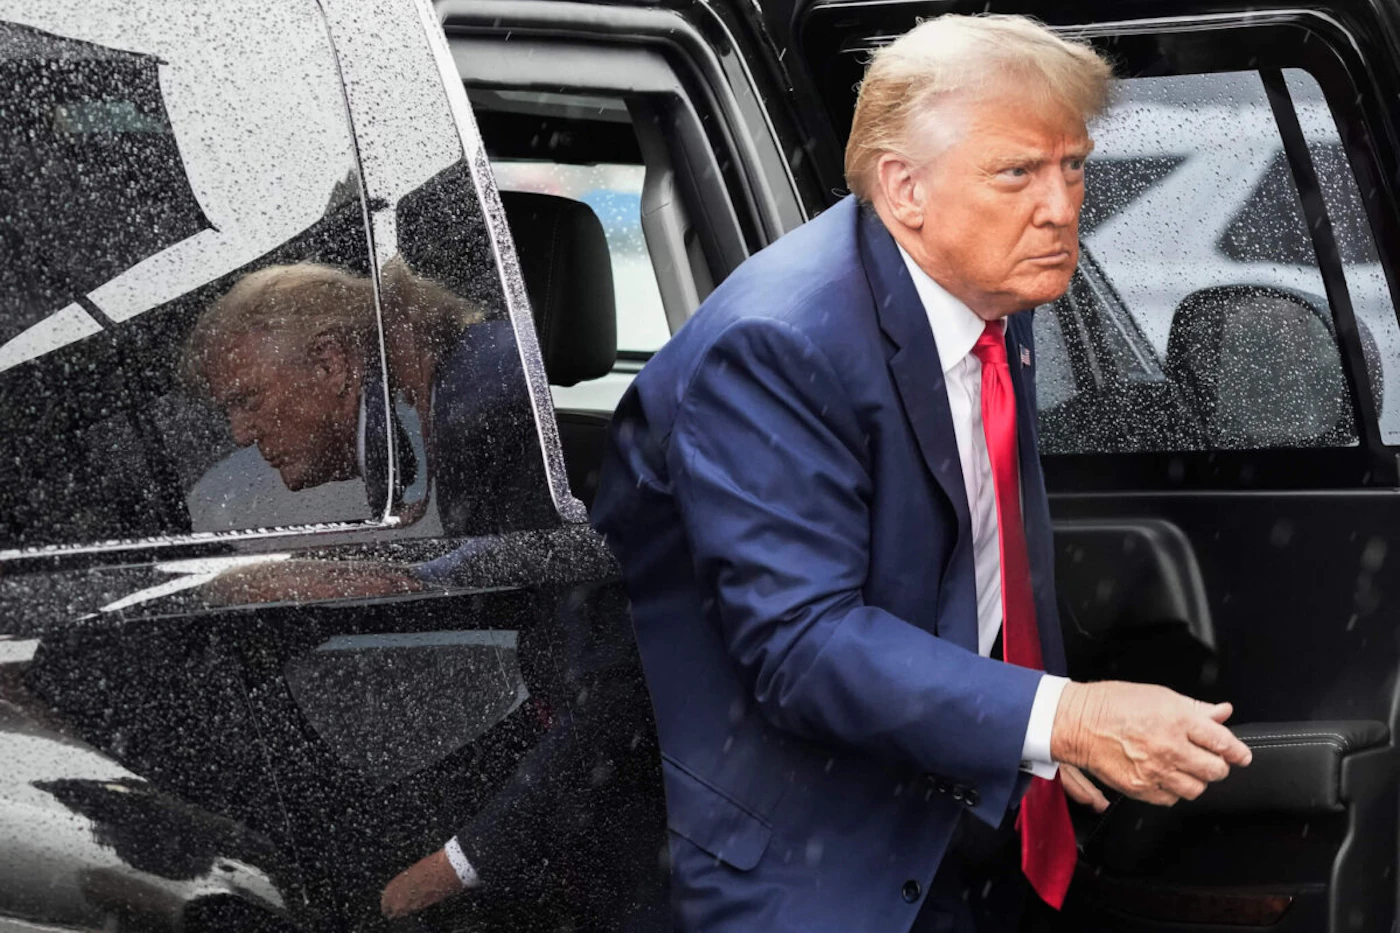 Former President Donald Trump arrives to board his plane at Ronald Reagan Washington National Airport, Aug. 3, 2023, in Arlington, Va., after facing a judge on federal conspiracy charges that allege he conspired to subvert the 2020 election. Trump and his legal team face long odds in their bid to move his 2020 election conspiracy trial out of Washington. They argue the Republican former president can’t possibly get a fair trial in the overwhelmingly Democratic nation’s capital.  (AP Photo/Alex Brandon, File)